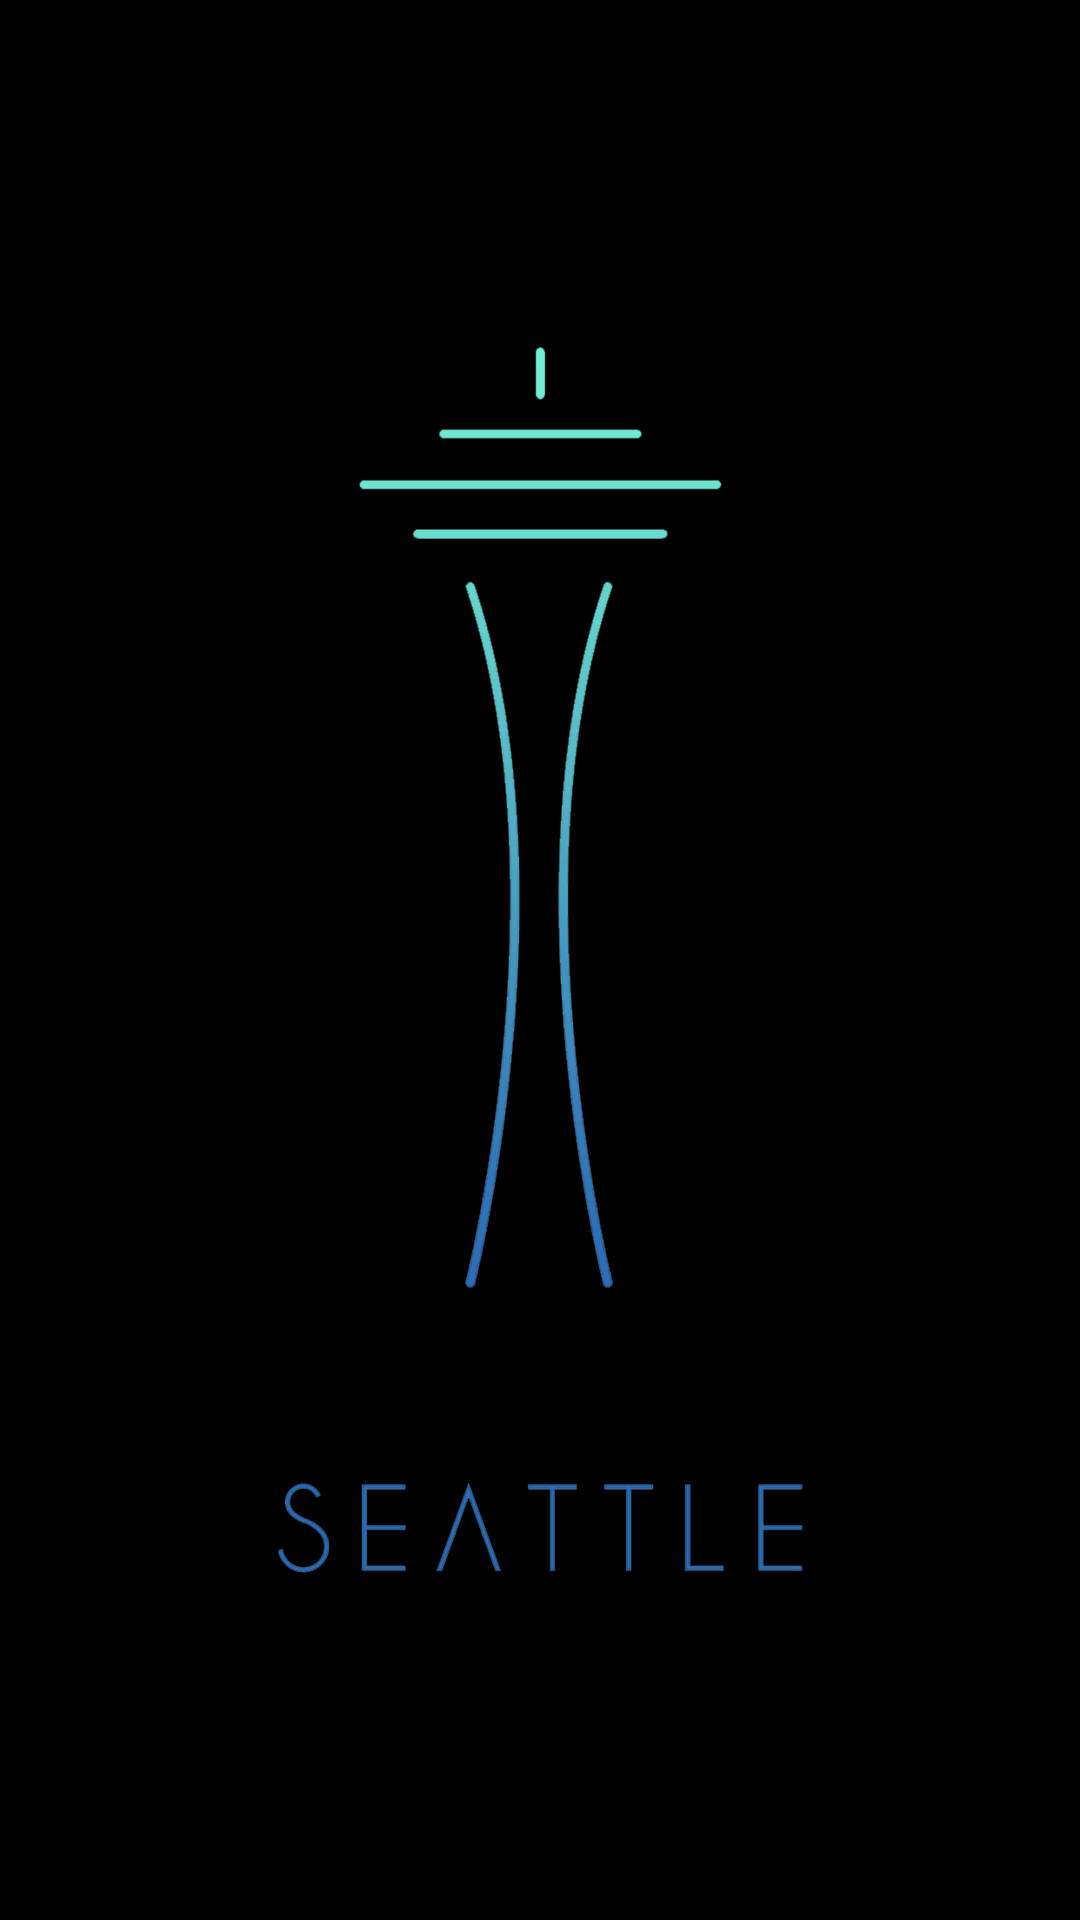 Seattle Iphone Simple Poster In Black